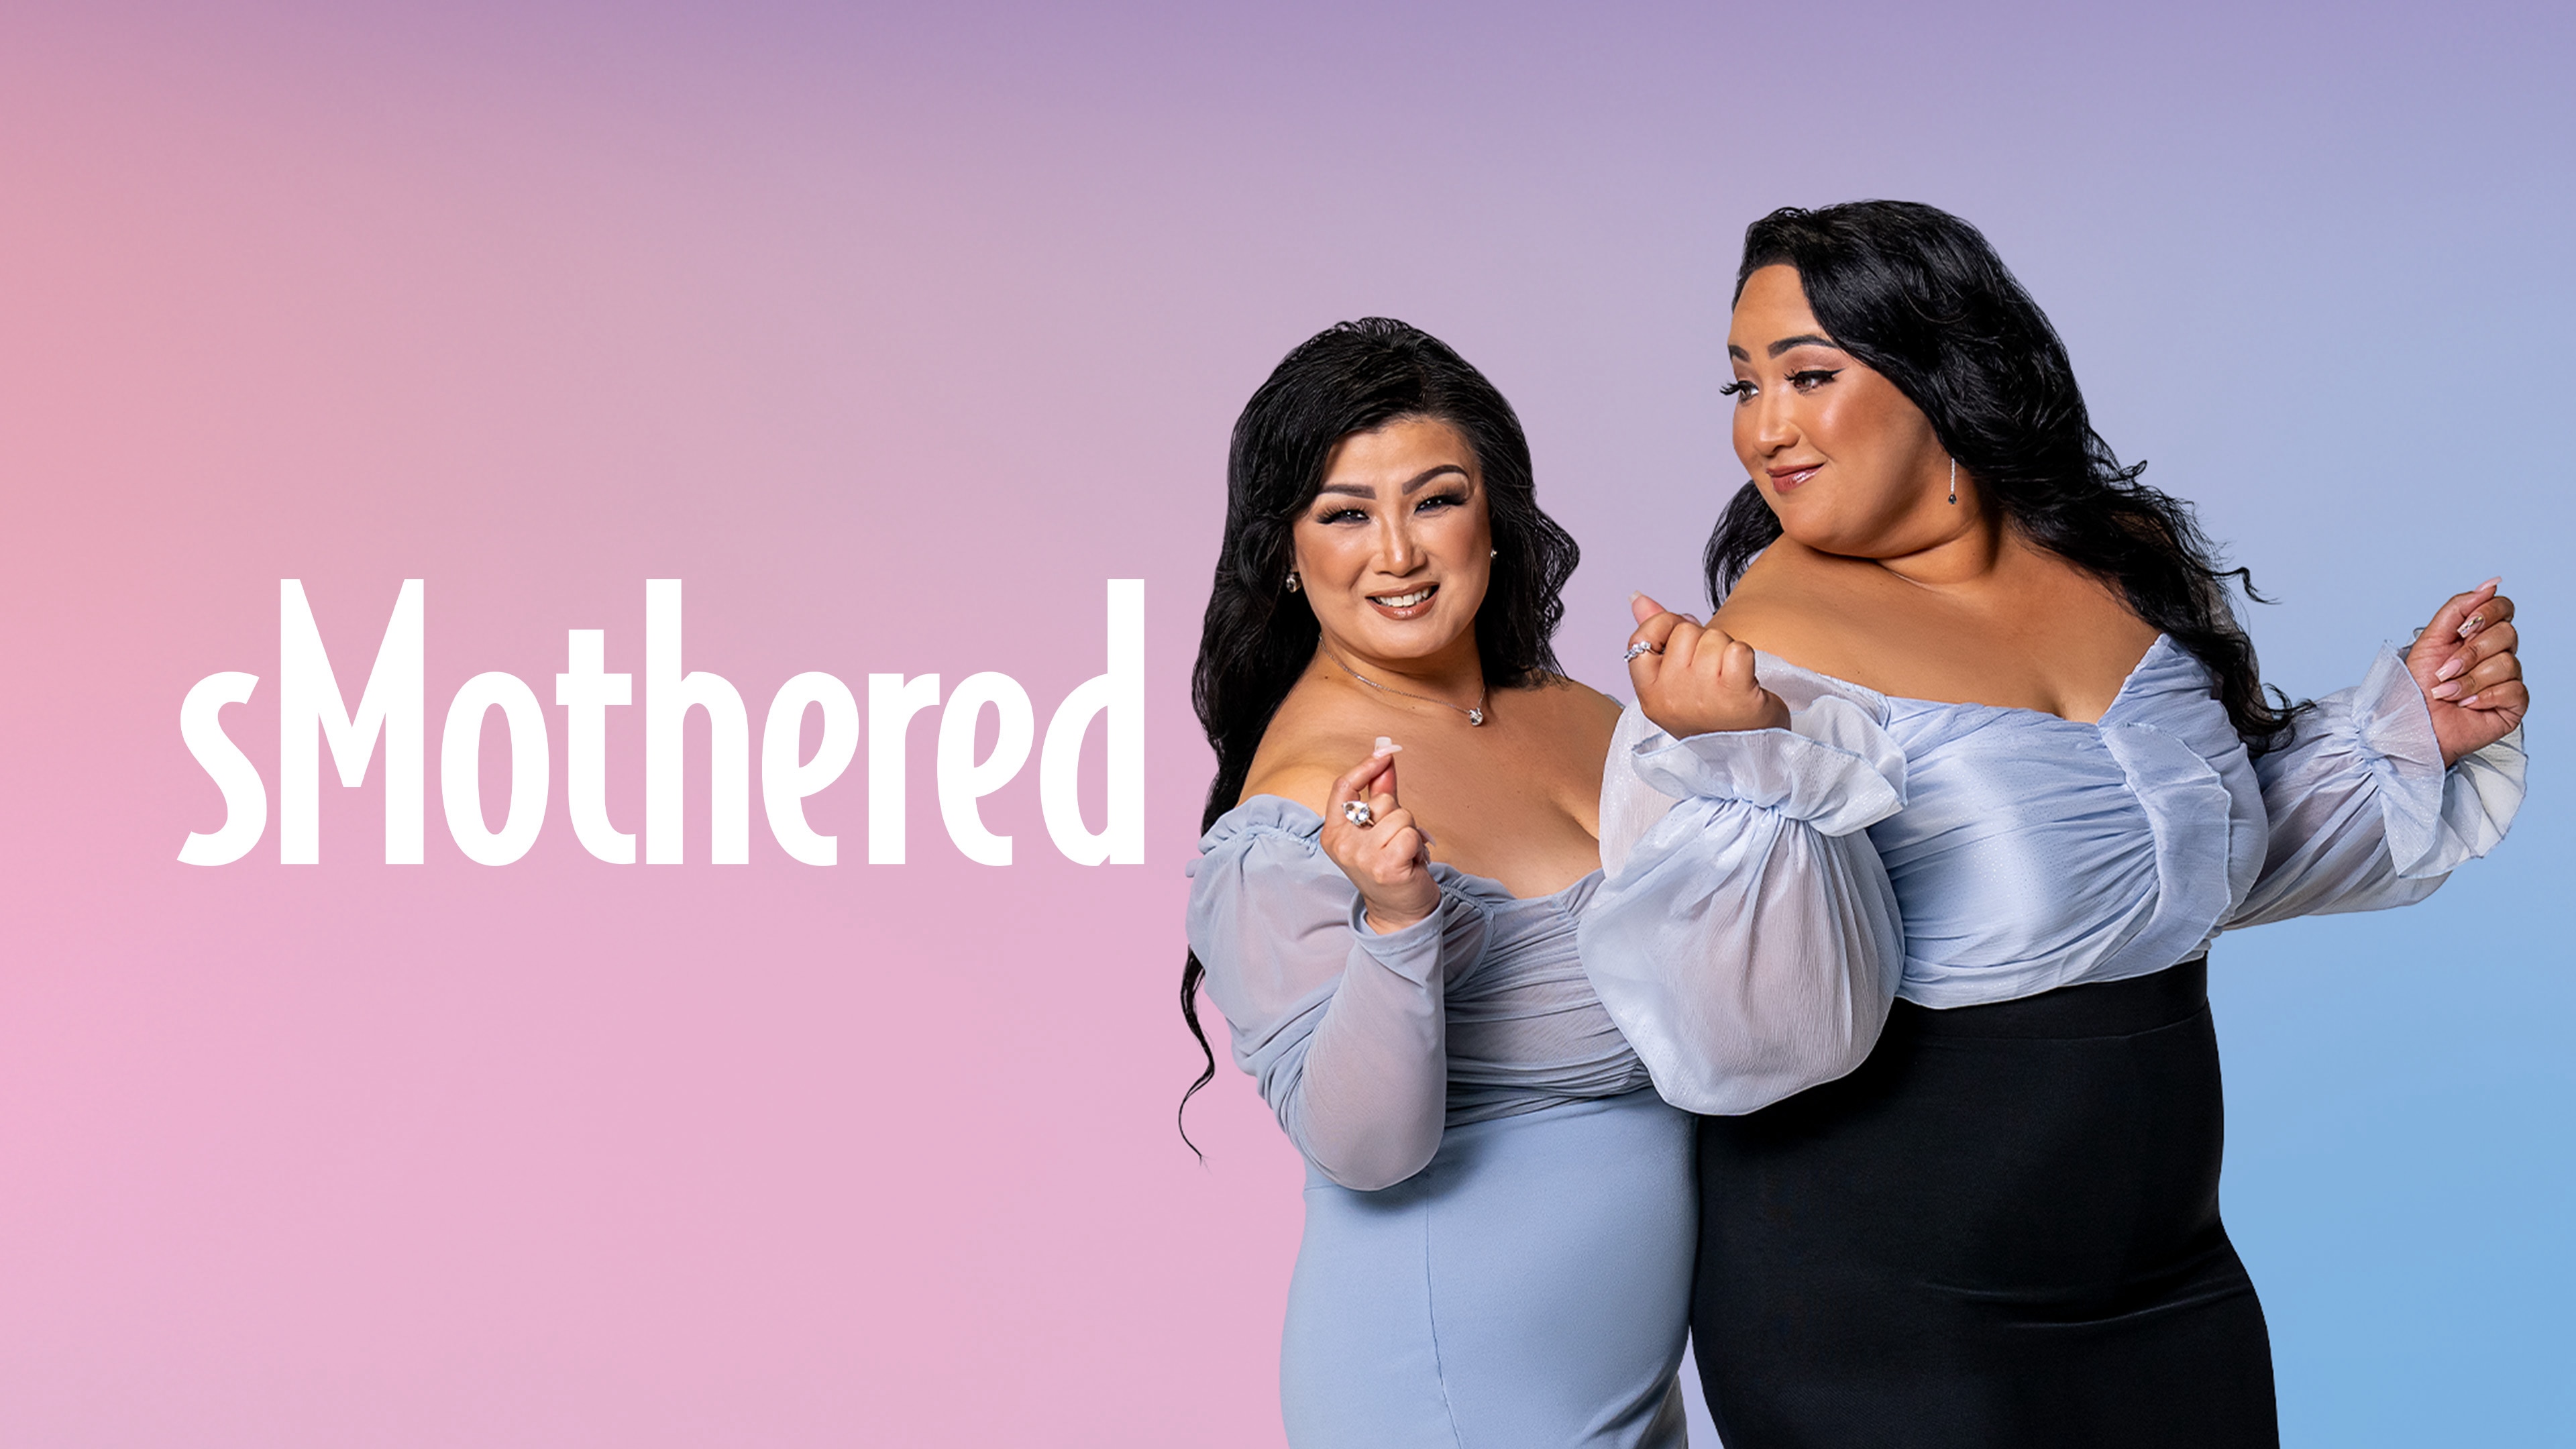 sMothered' exclusive: Meet the baby that surprised one family